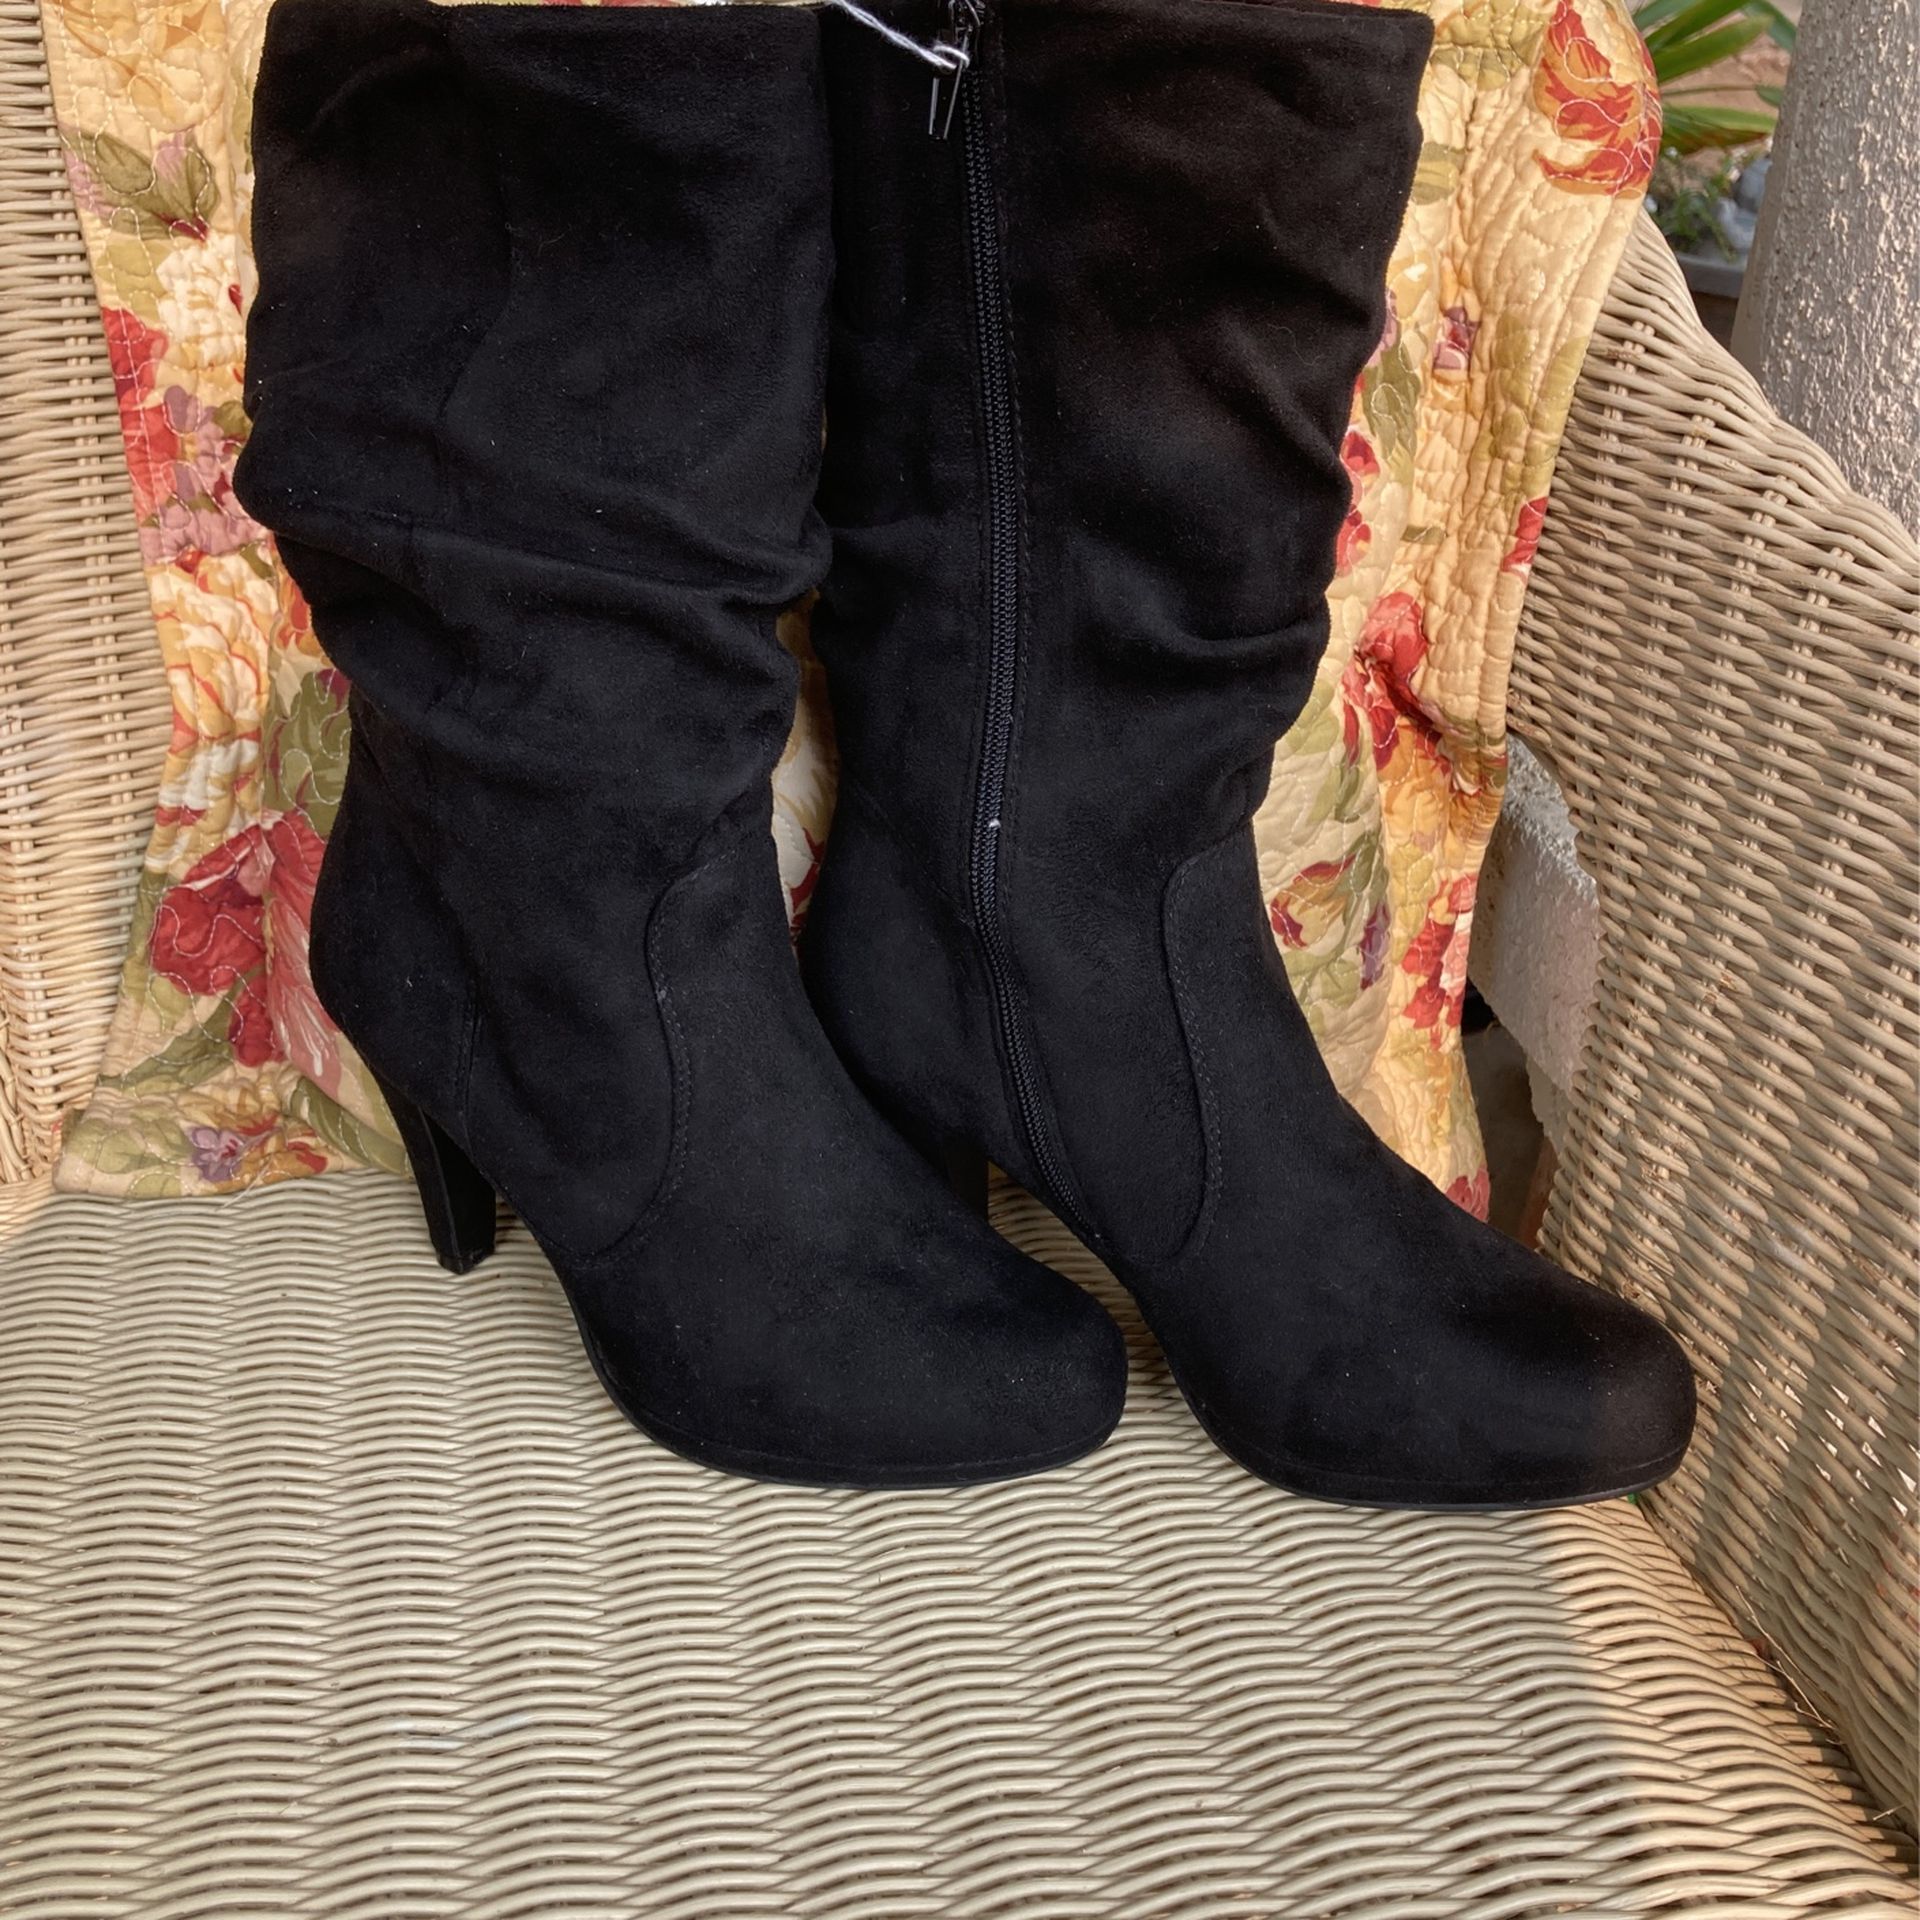 Black Suede  Boots 